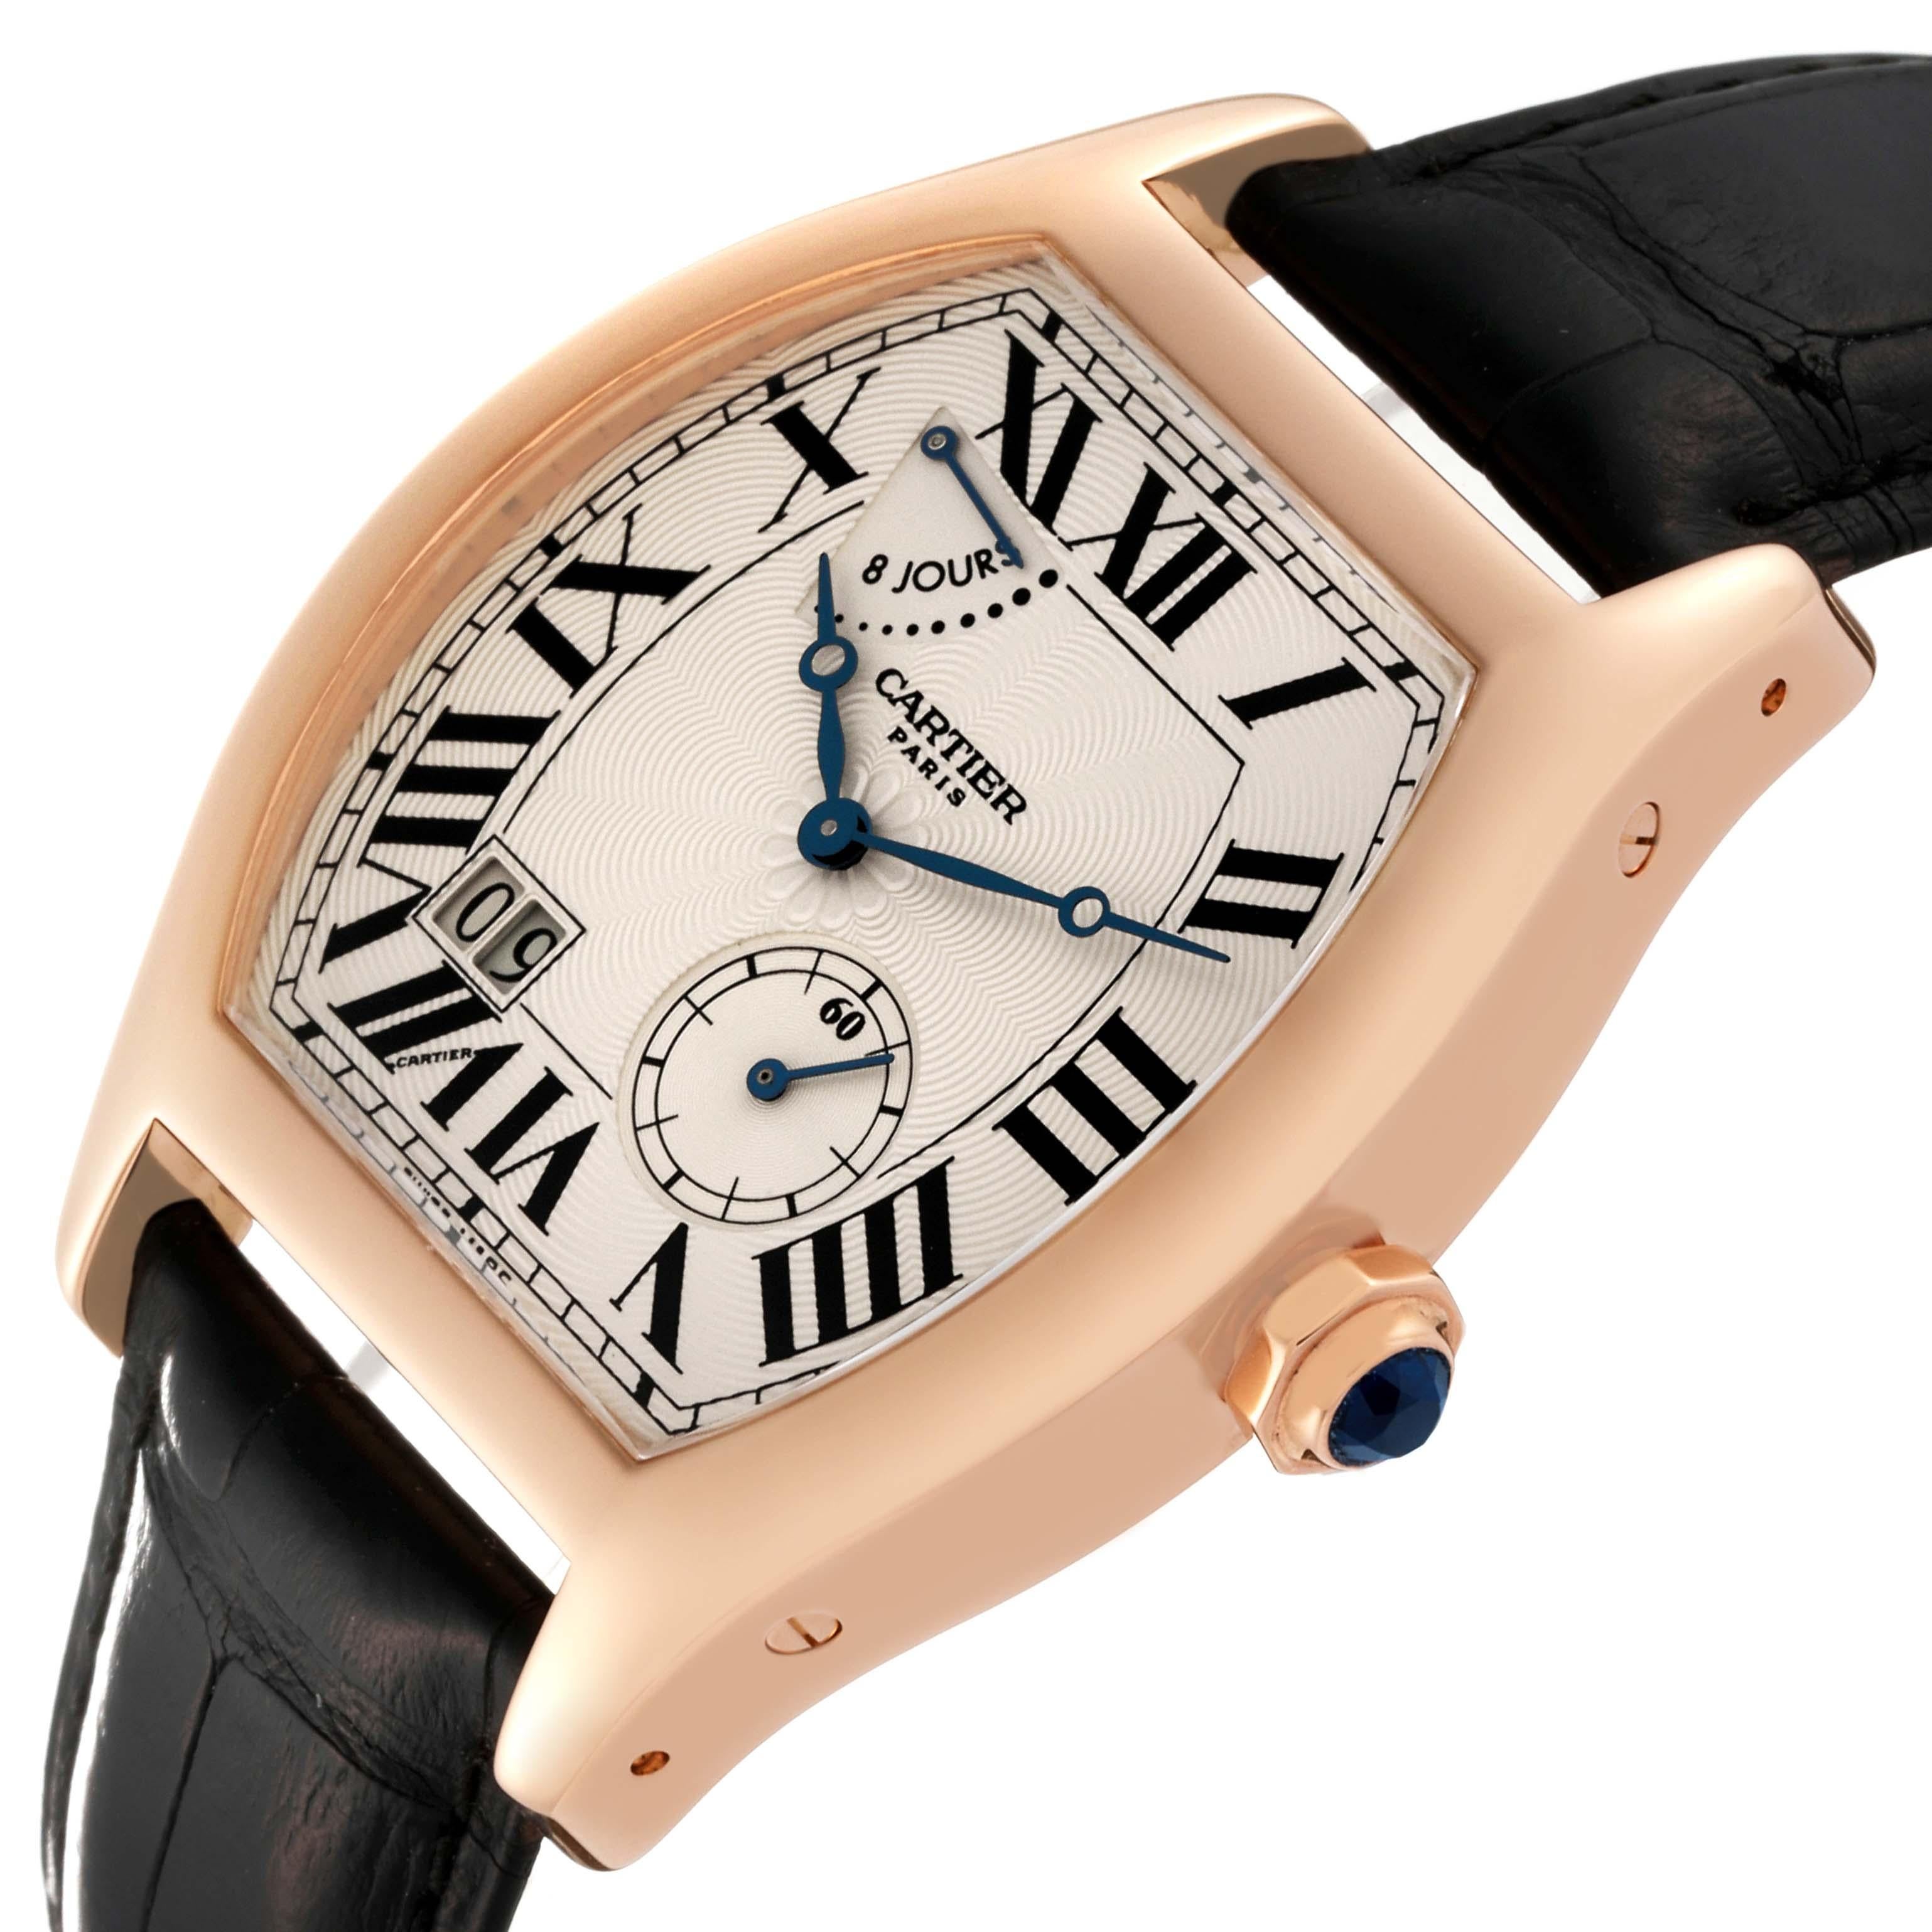 Cartier Tortue Privee Rose Gold 8 Day Power Reserve Mens Watch W1545851 For Sale 3